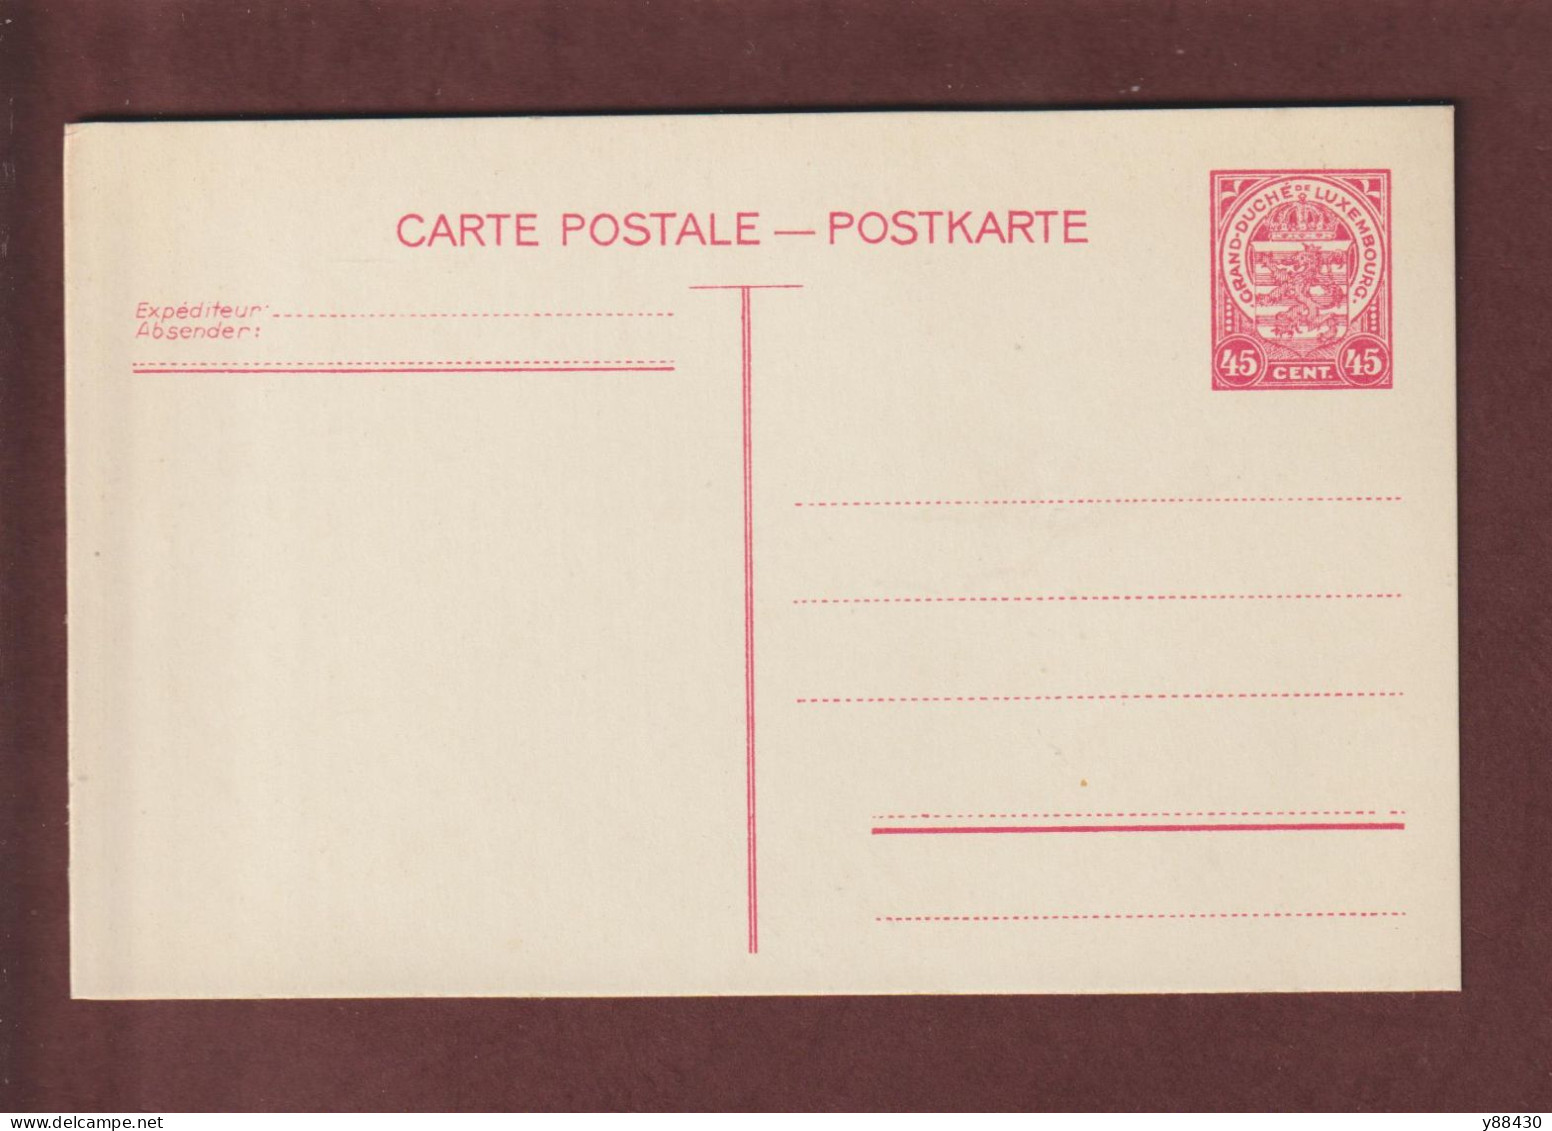 LUXEMBOURG - Entier Postal Neuf - 1910/1930 - Carte Postale  - 2 Scan - Stamped Stationery